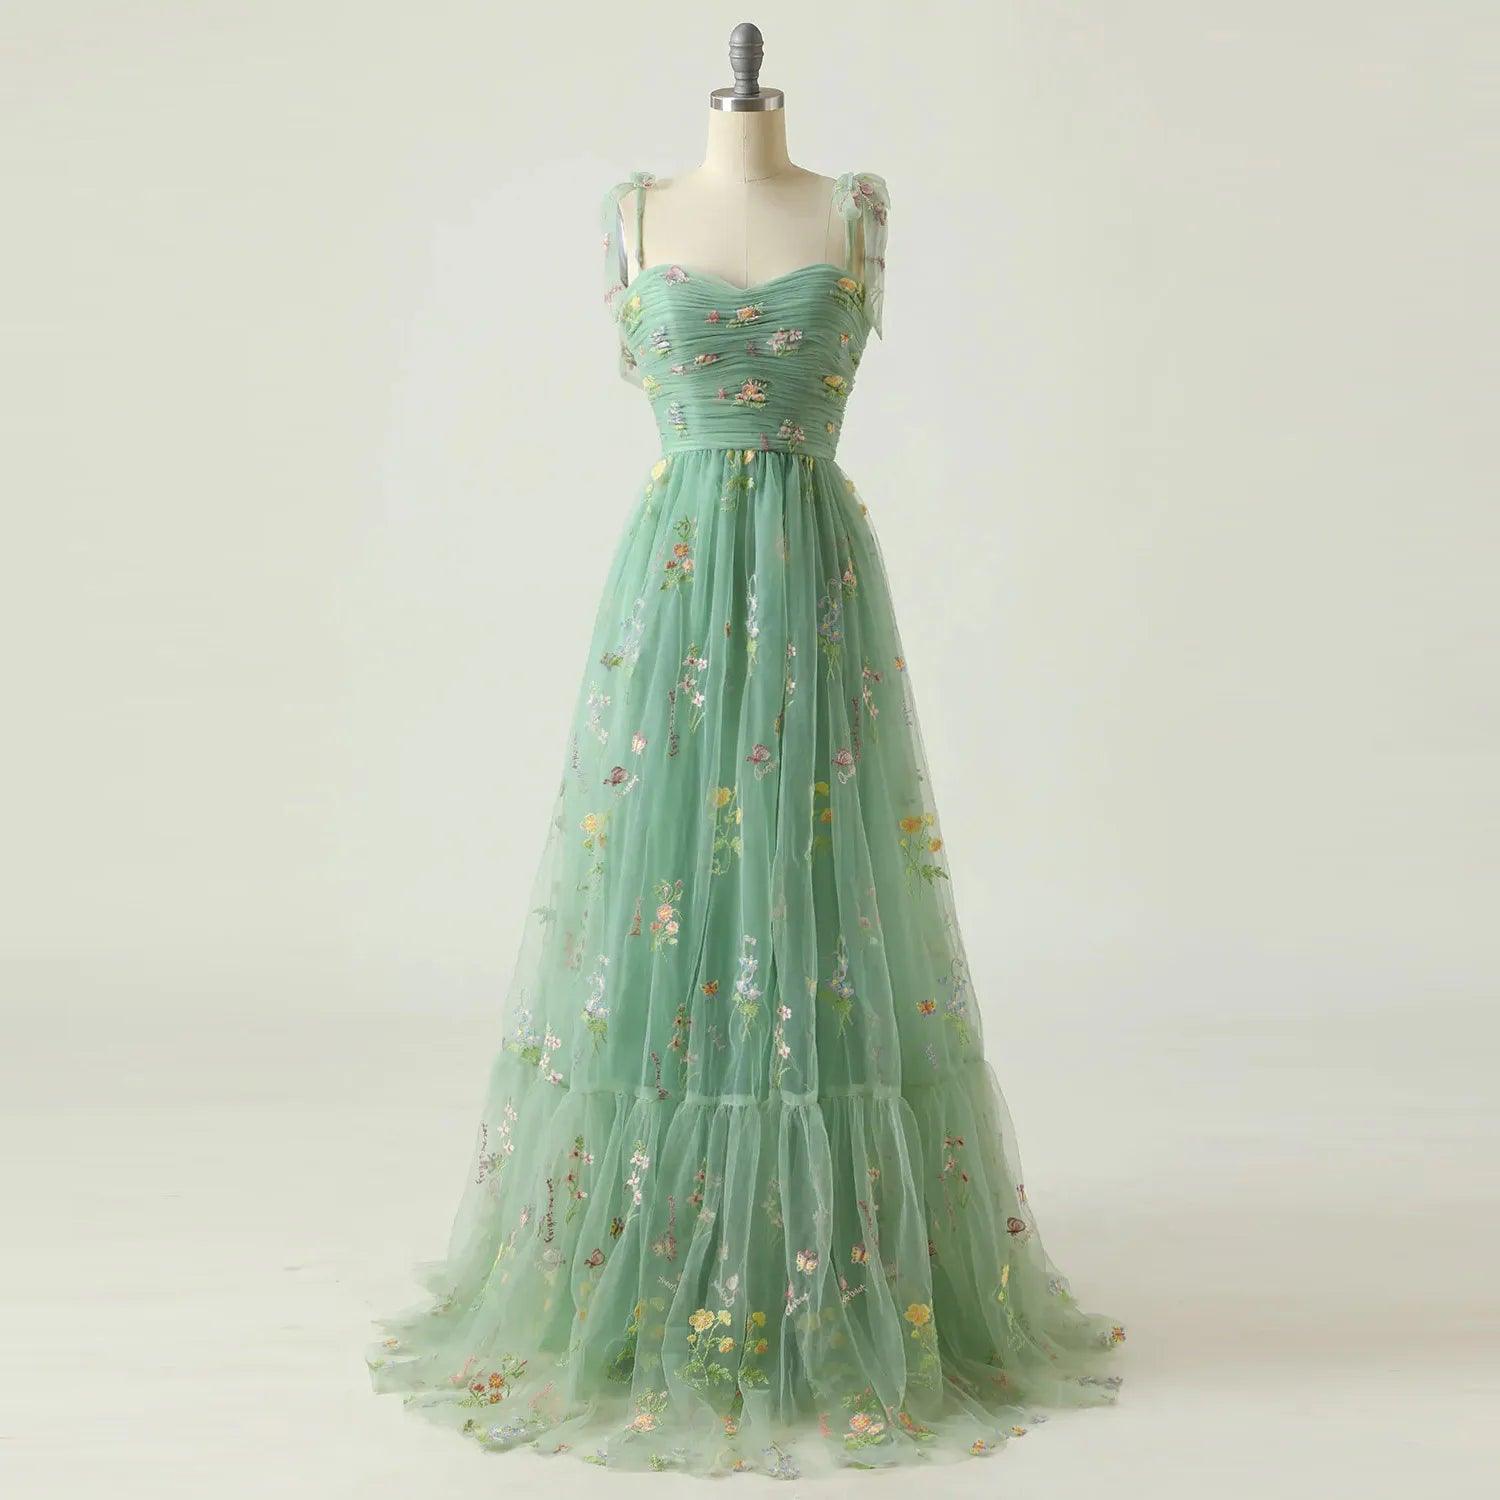 Elegant Mint Green Tulle Tea-Length Party Dress with Adjustable Straps  ourlum.com   